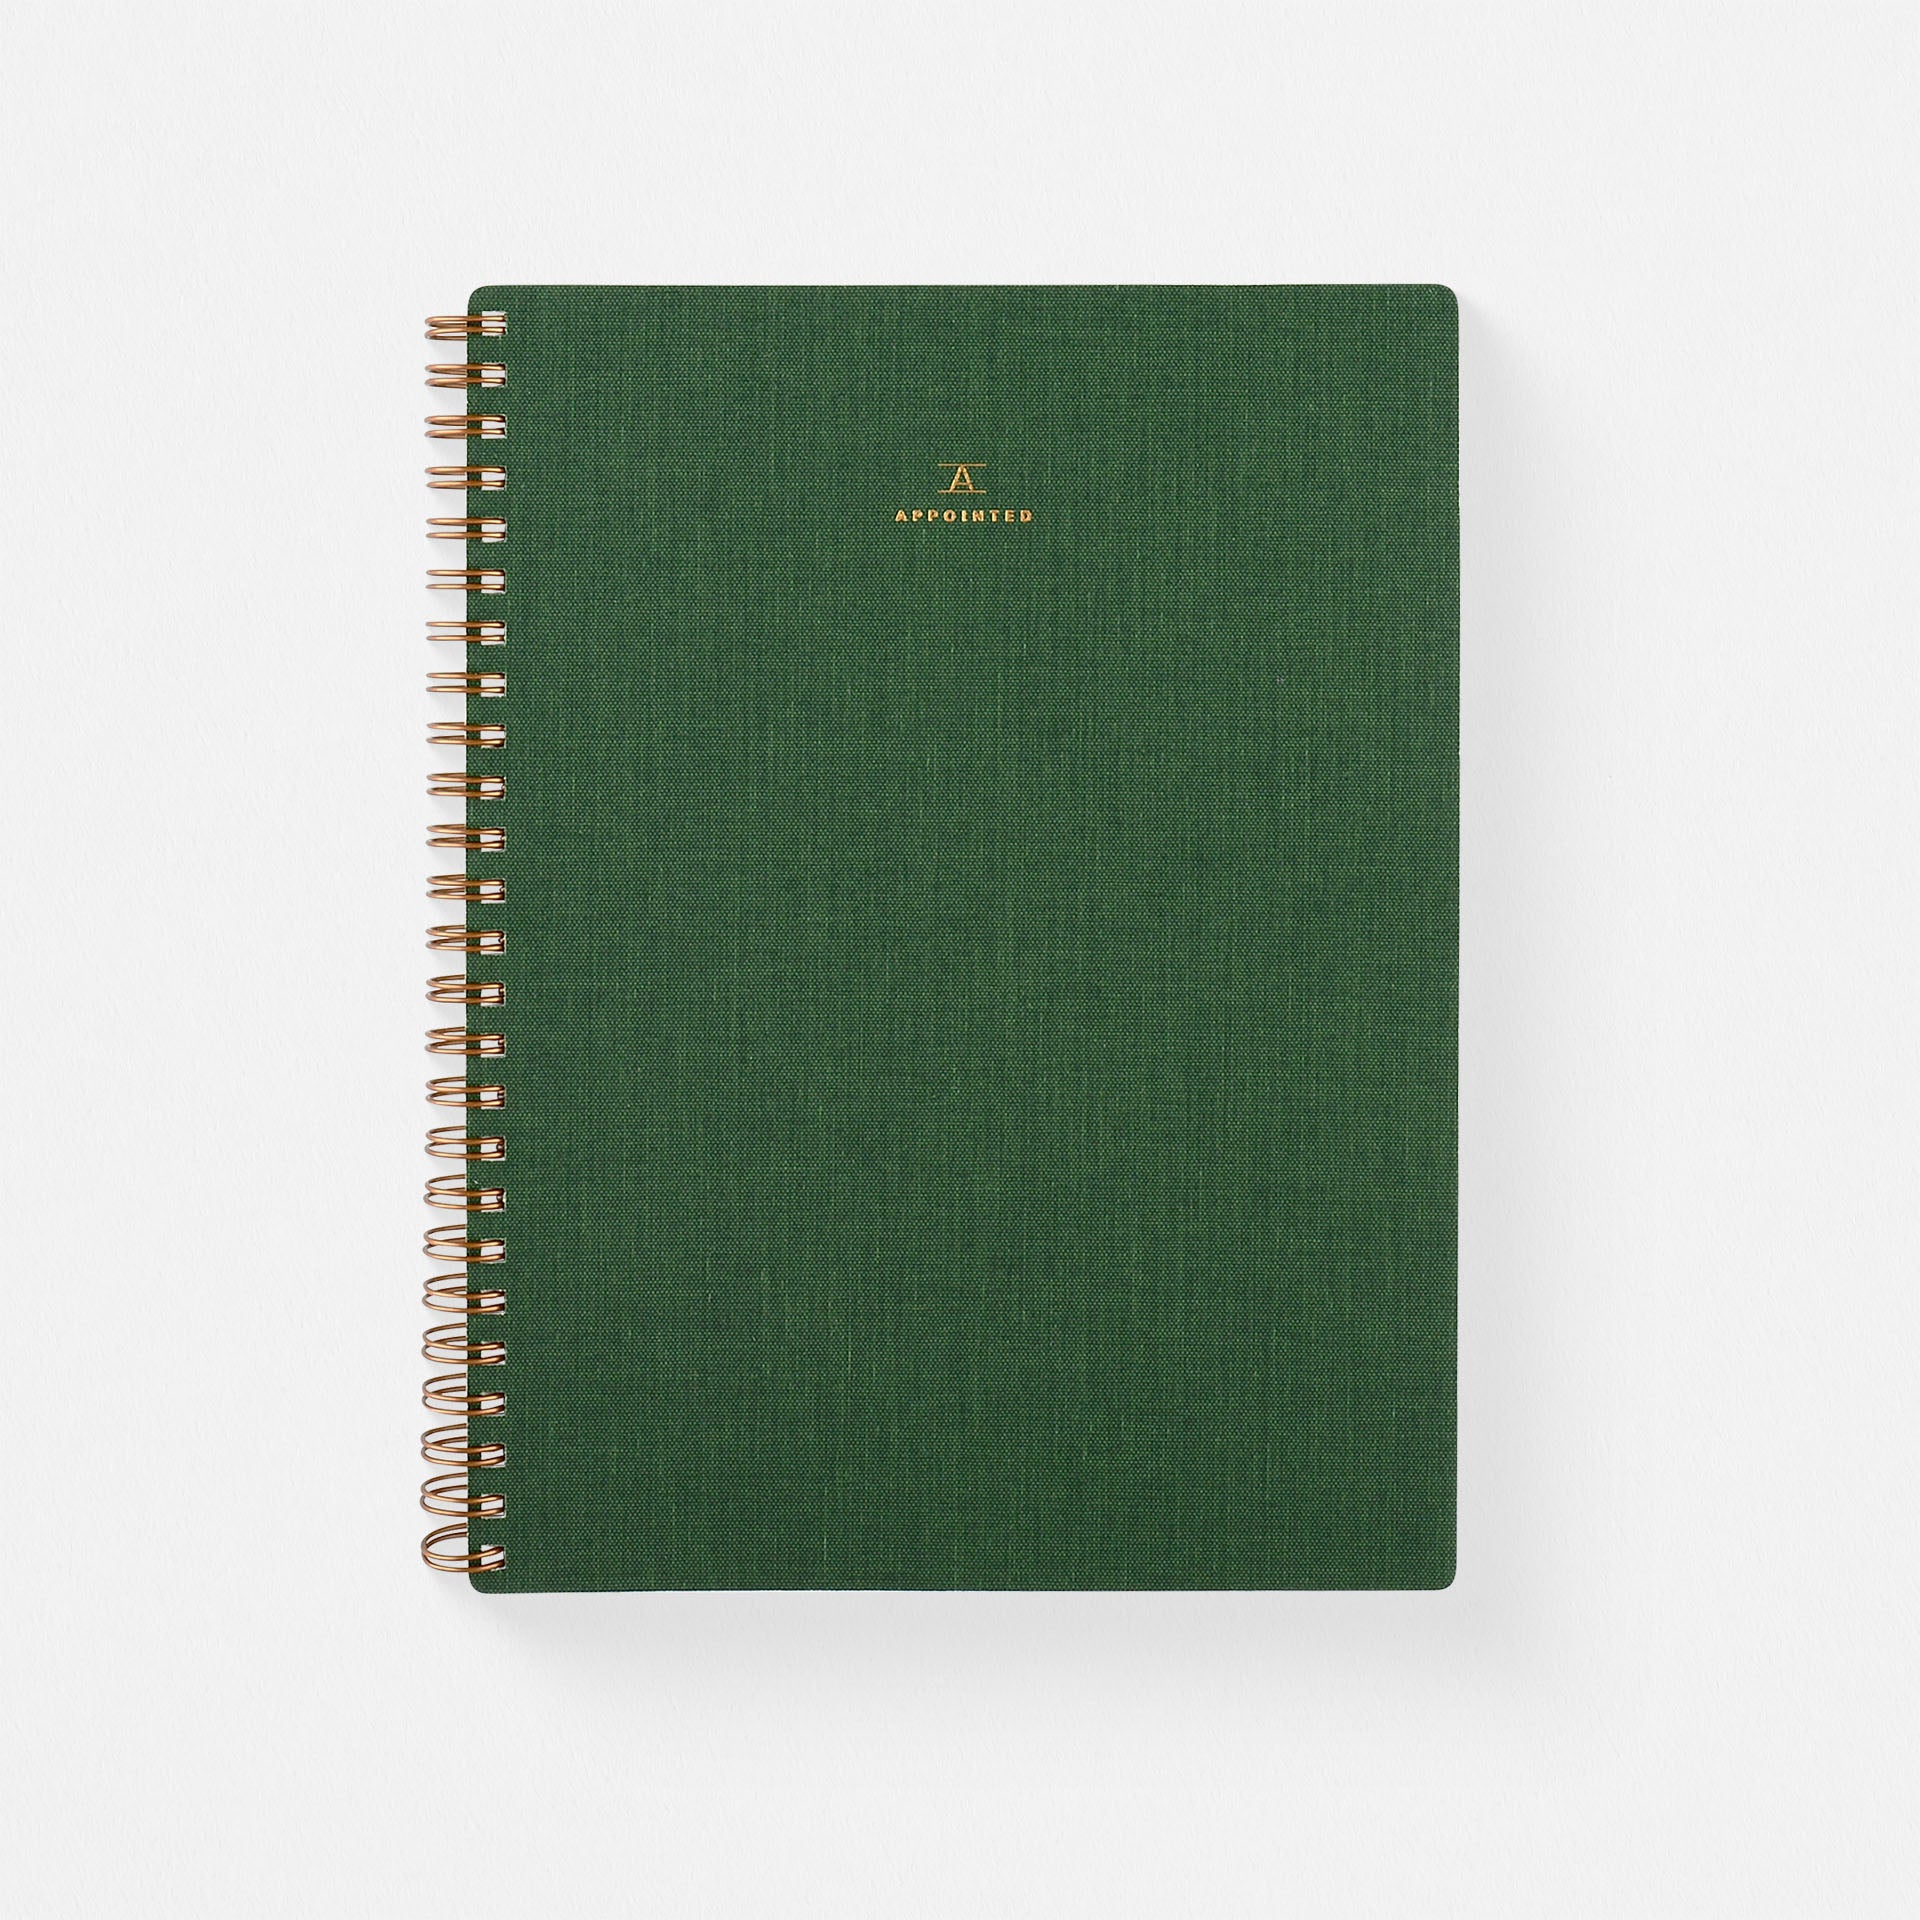 Appointed Fern Green Workbook | Lined Or Dot Grid 